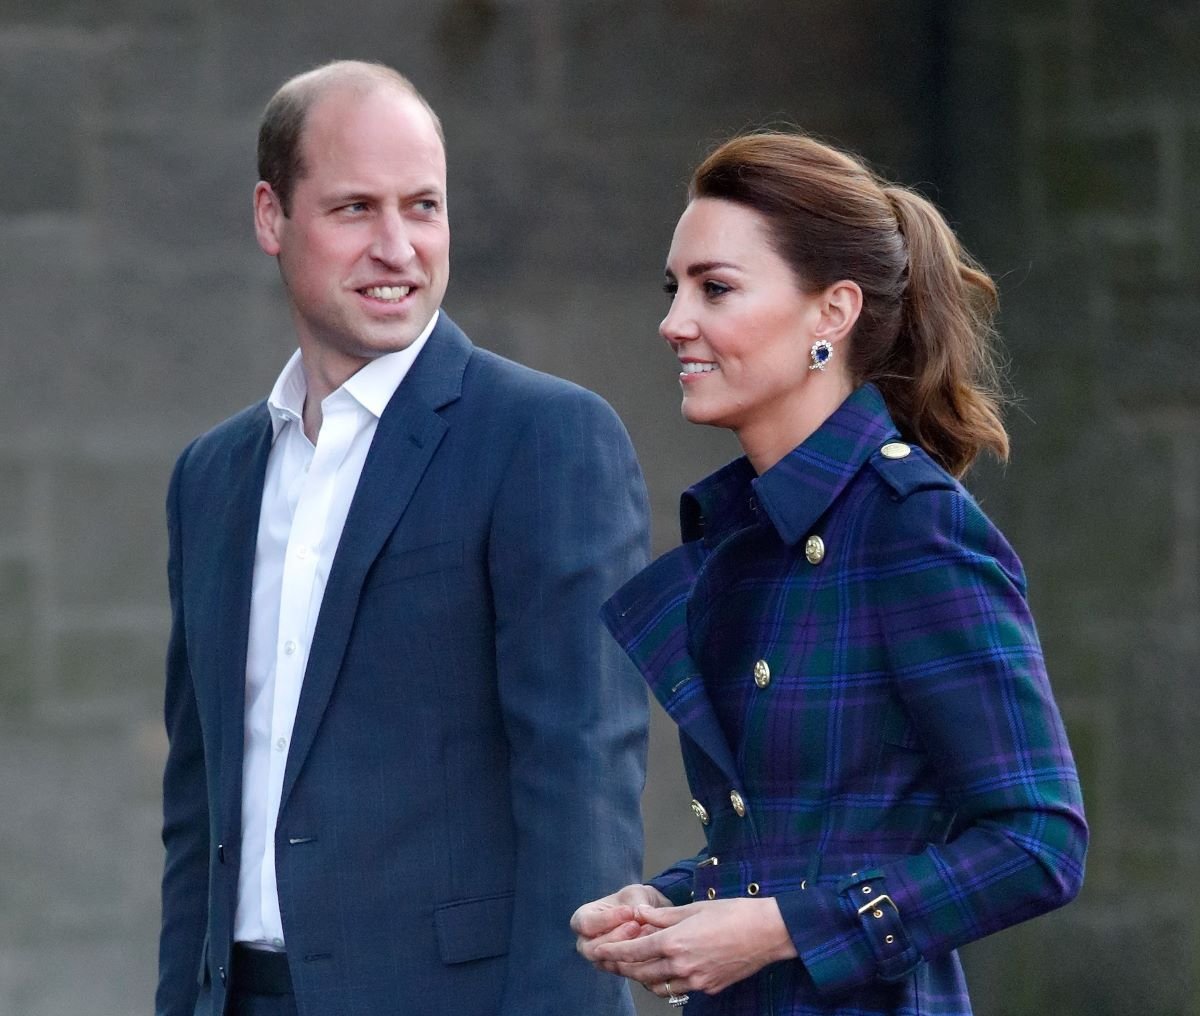 Prince William and Kate Middleton host an event at The Palace of Holyroodhouse in Edinburgh, Scotland